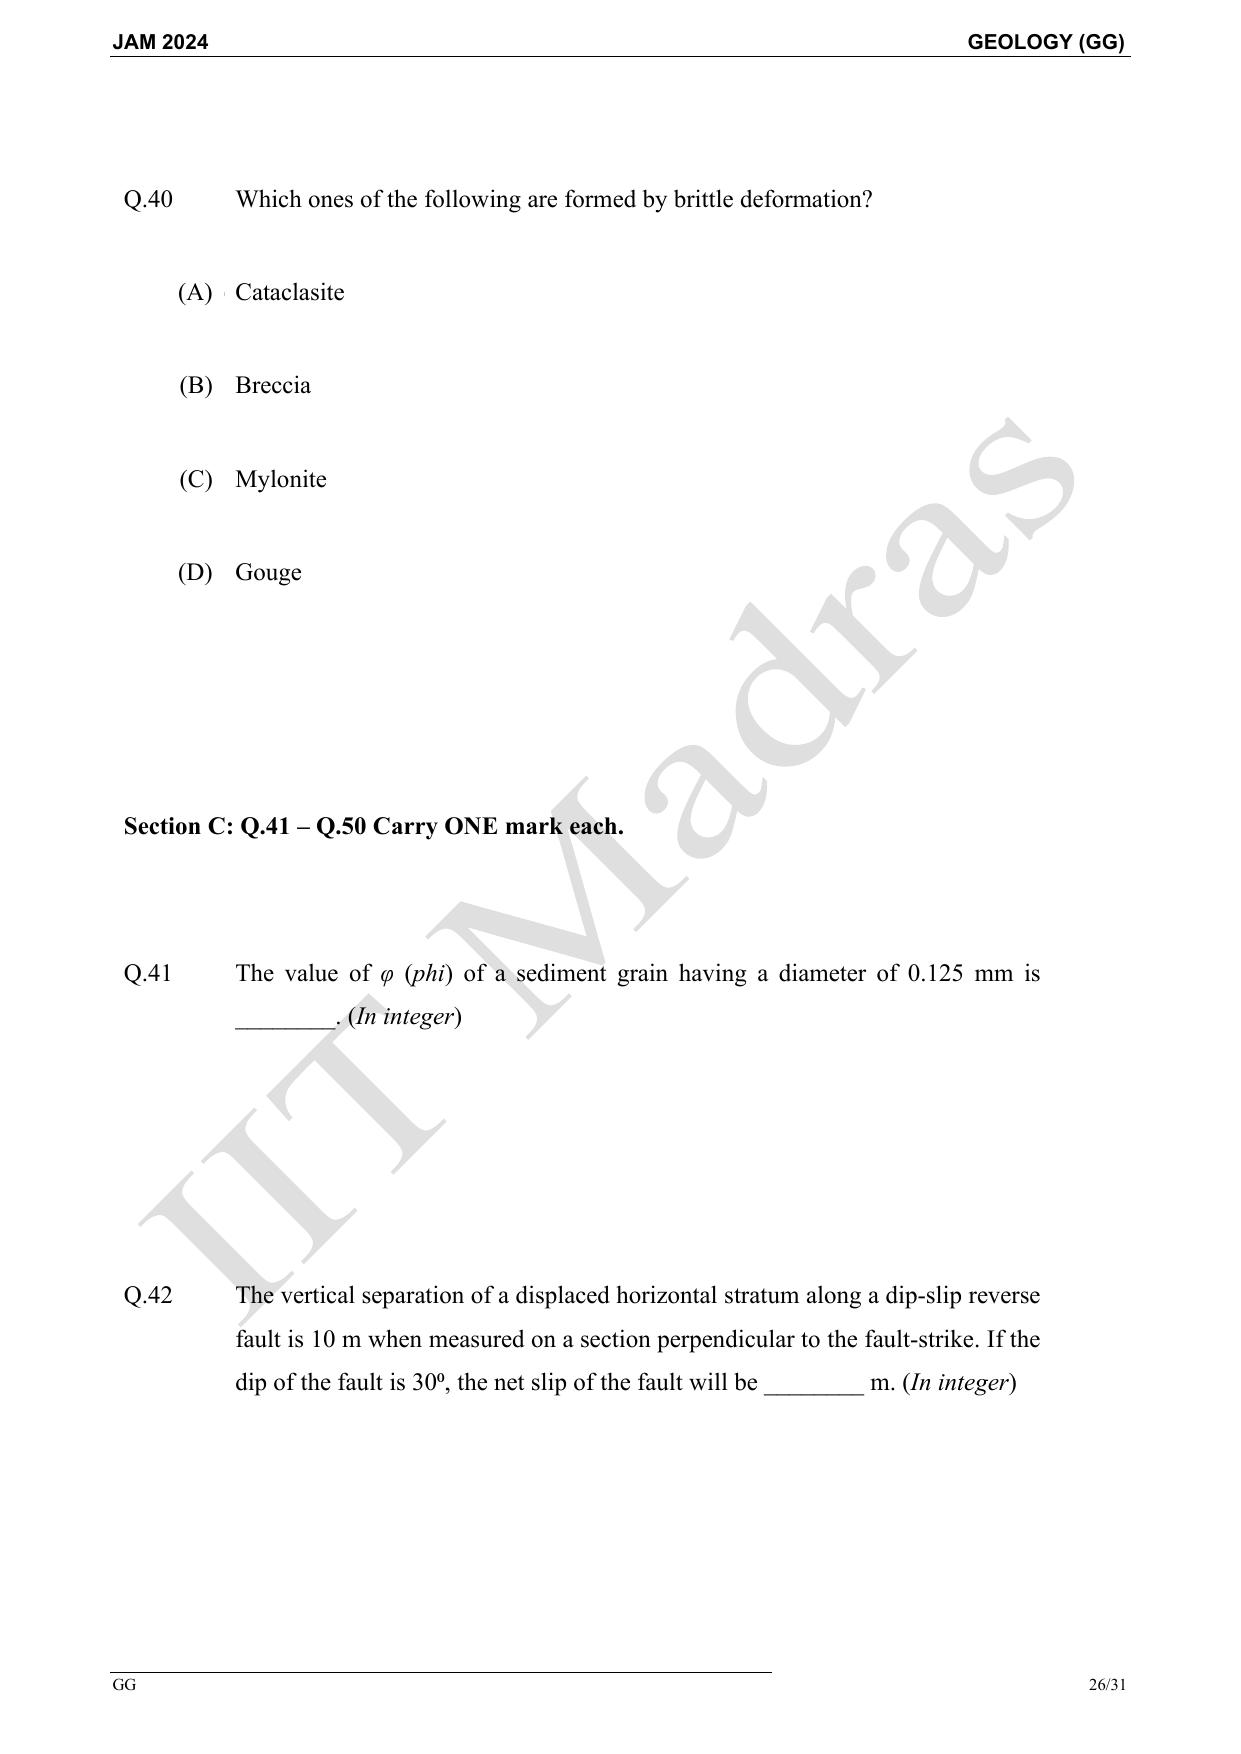 IIT JAM 2024 Geology (GG) Master Question Paper - Page 26